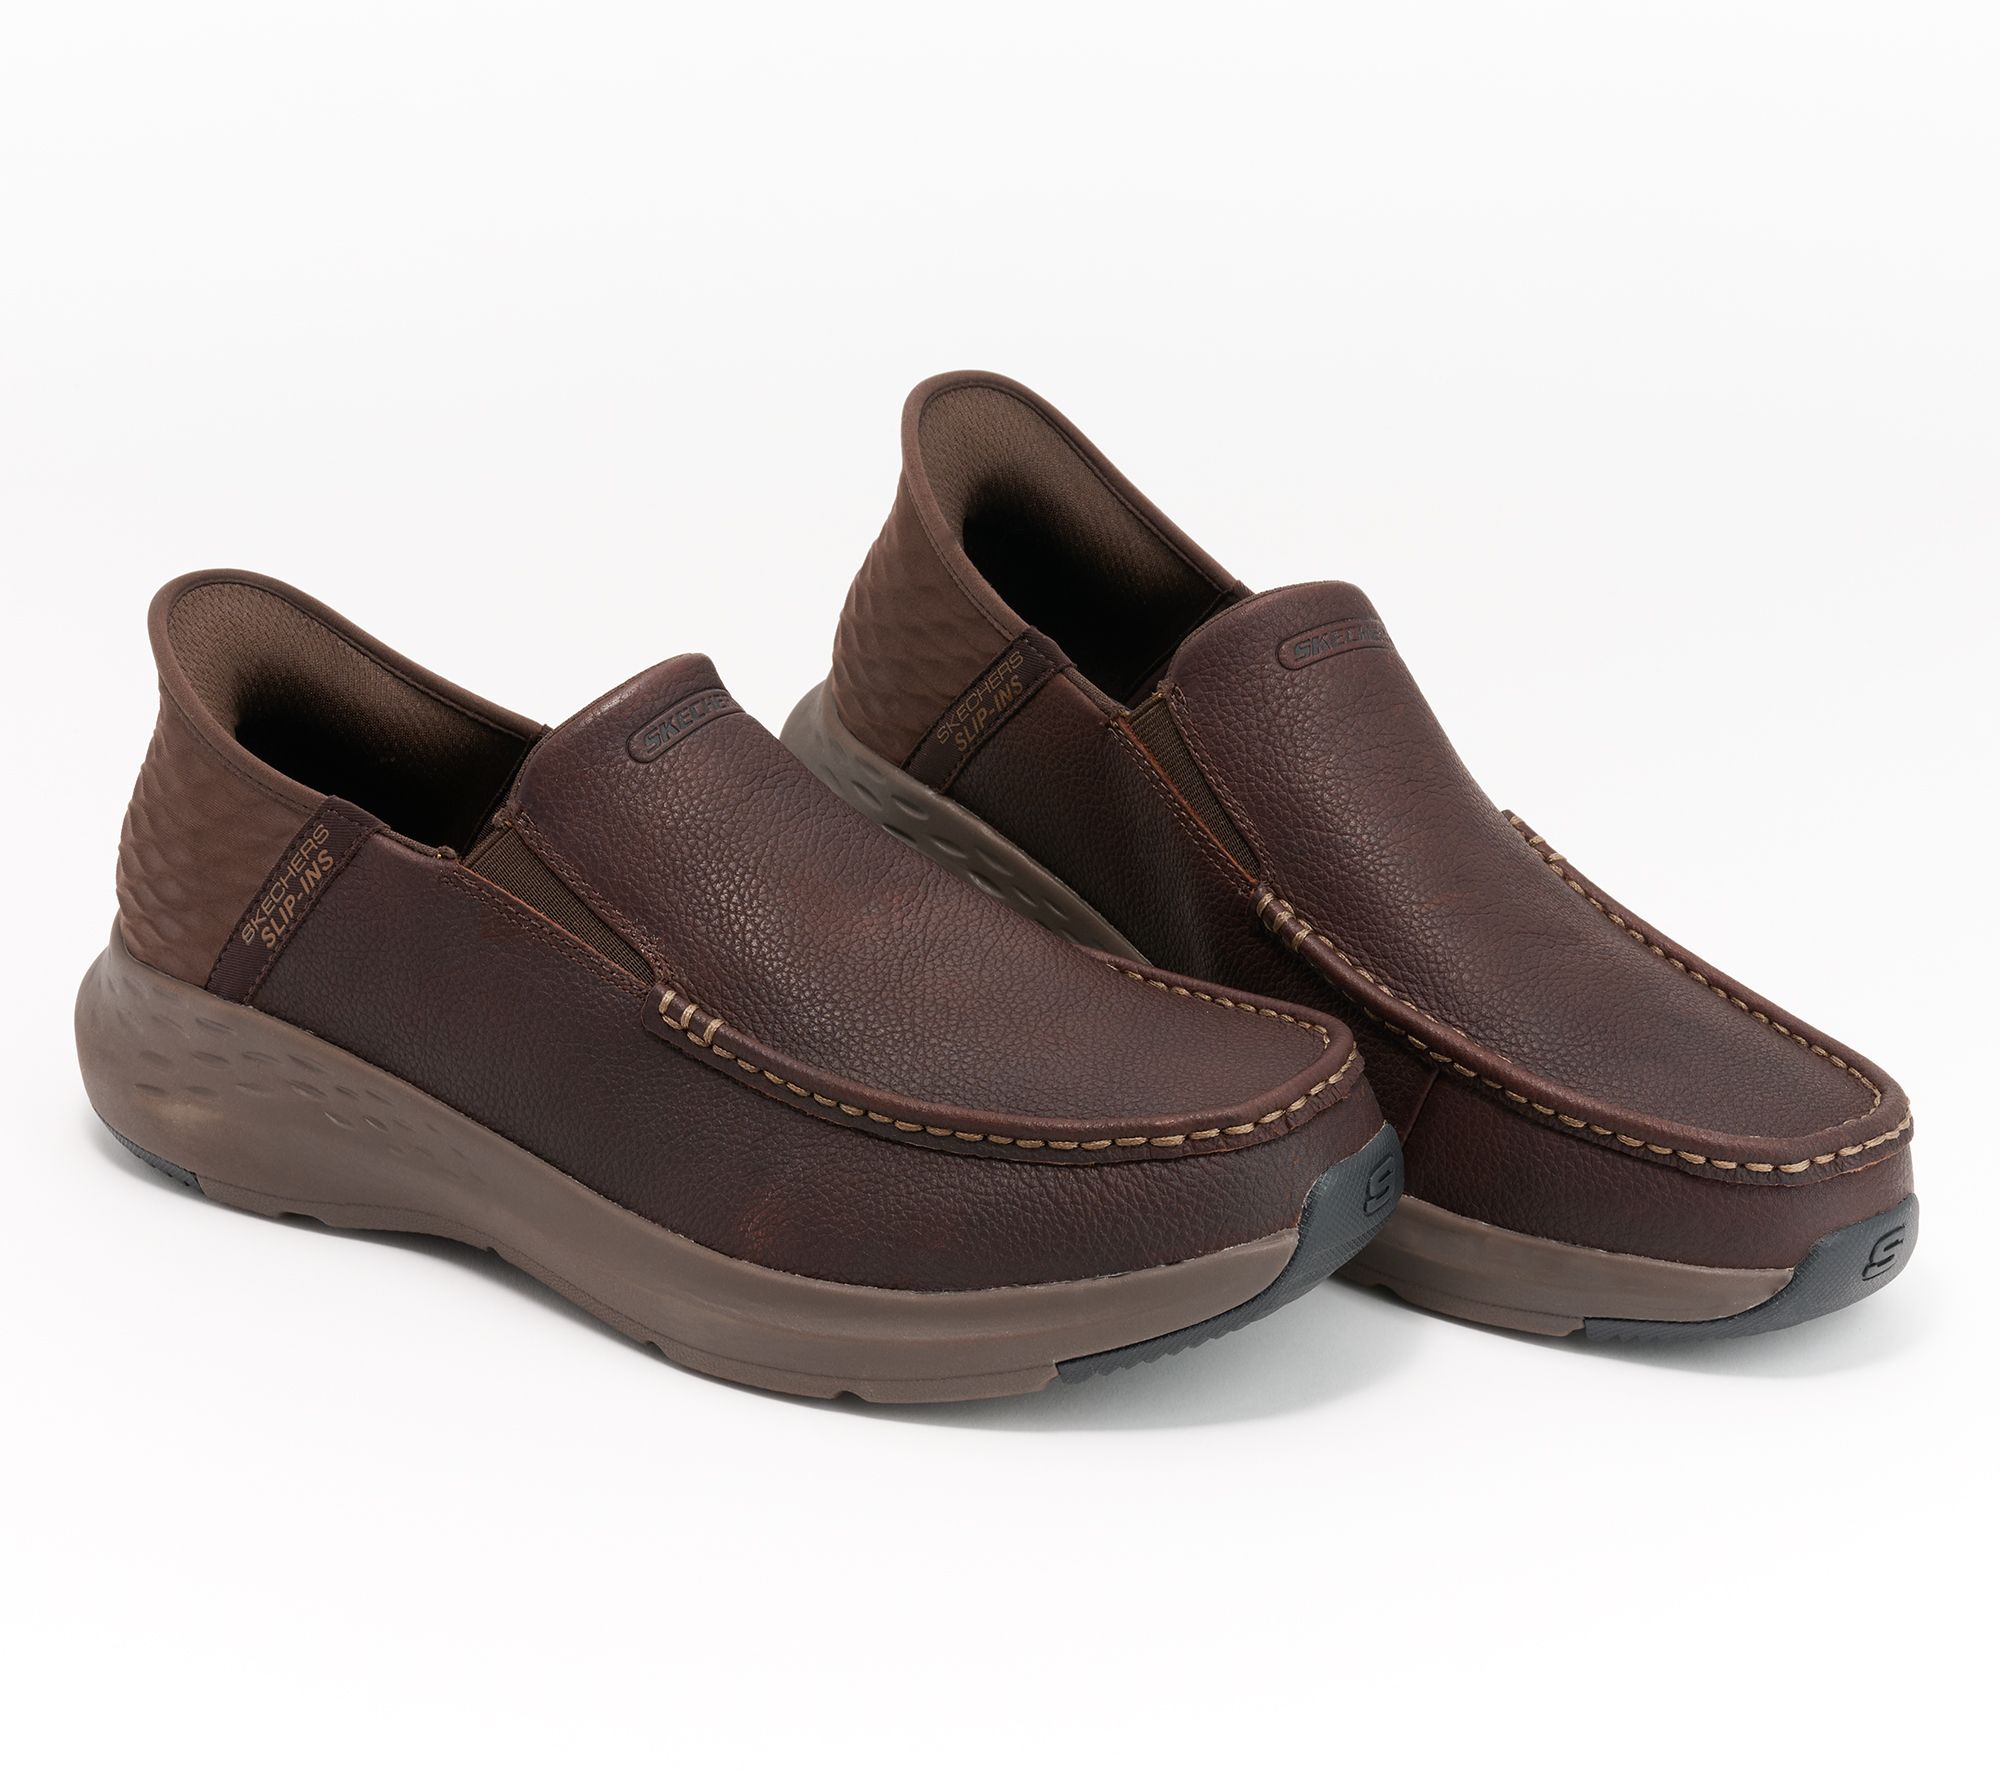 Men's Shoes 11 1/2 M - Arch Support - Adaptive Clothing & Shoes 